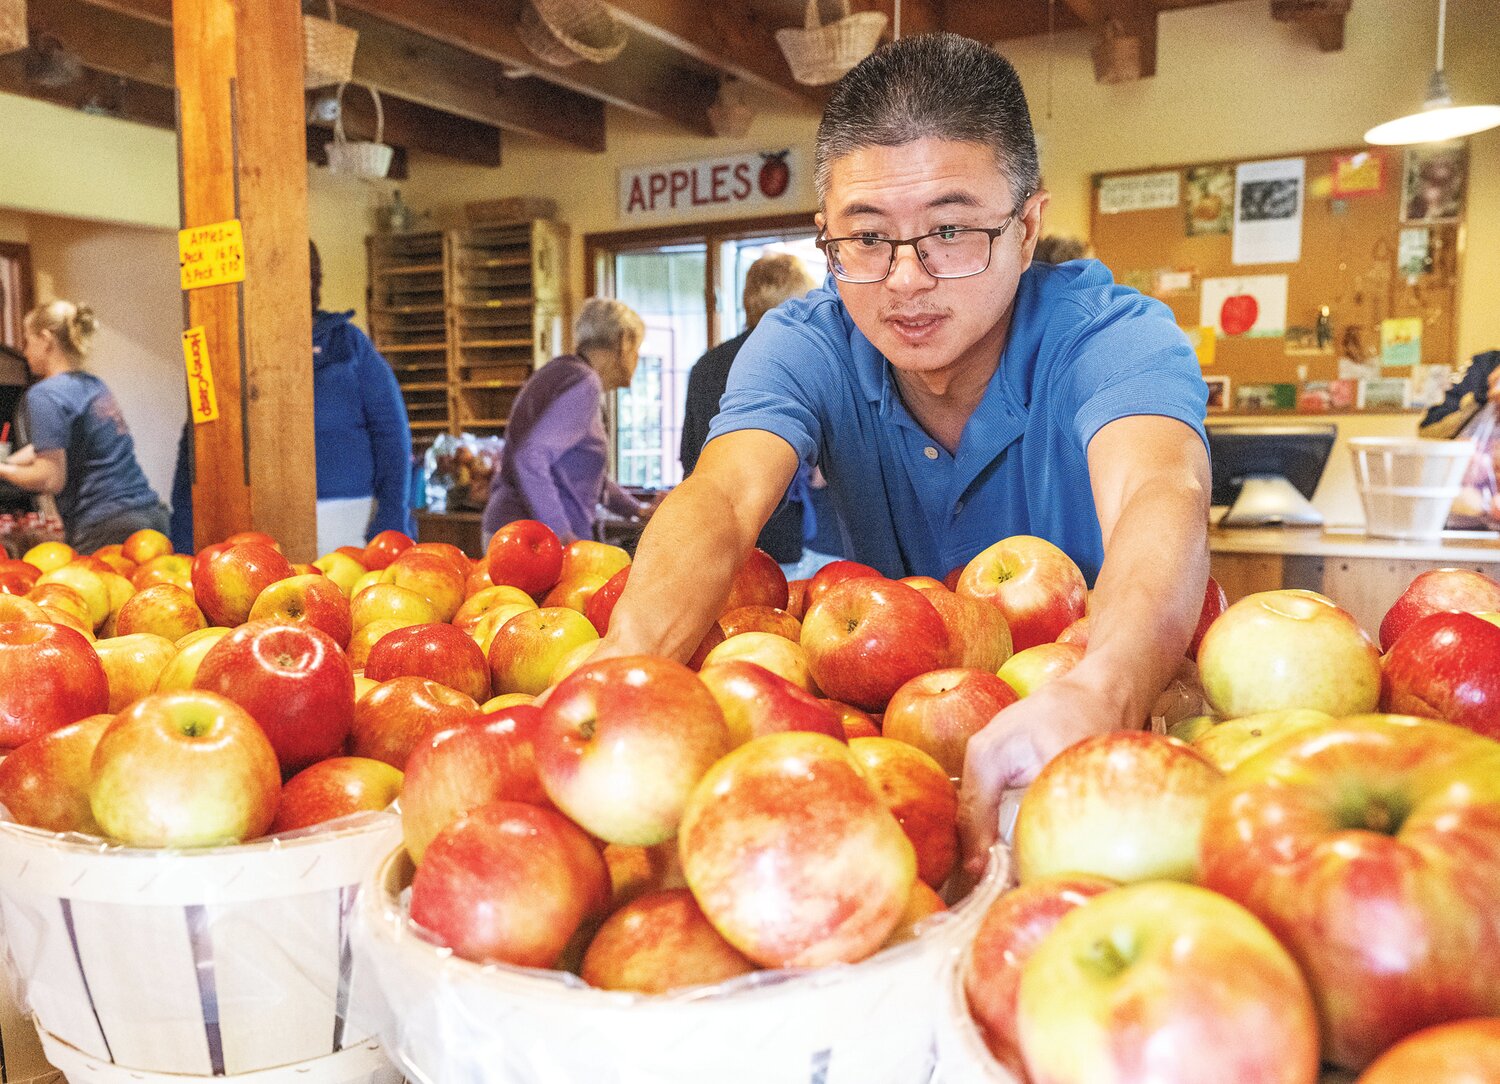 Felix Chen gathers apples to buy at the market in Solebury Orchards Saturday.